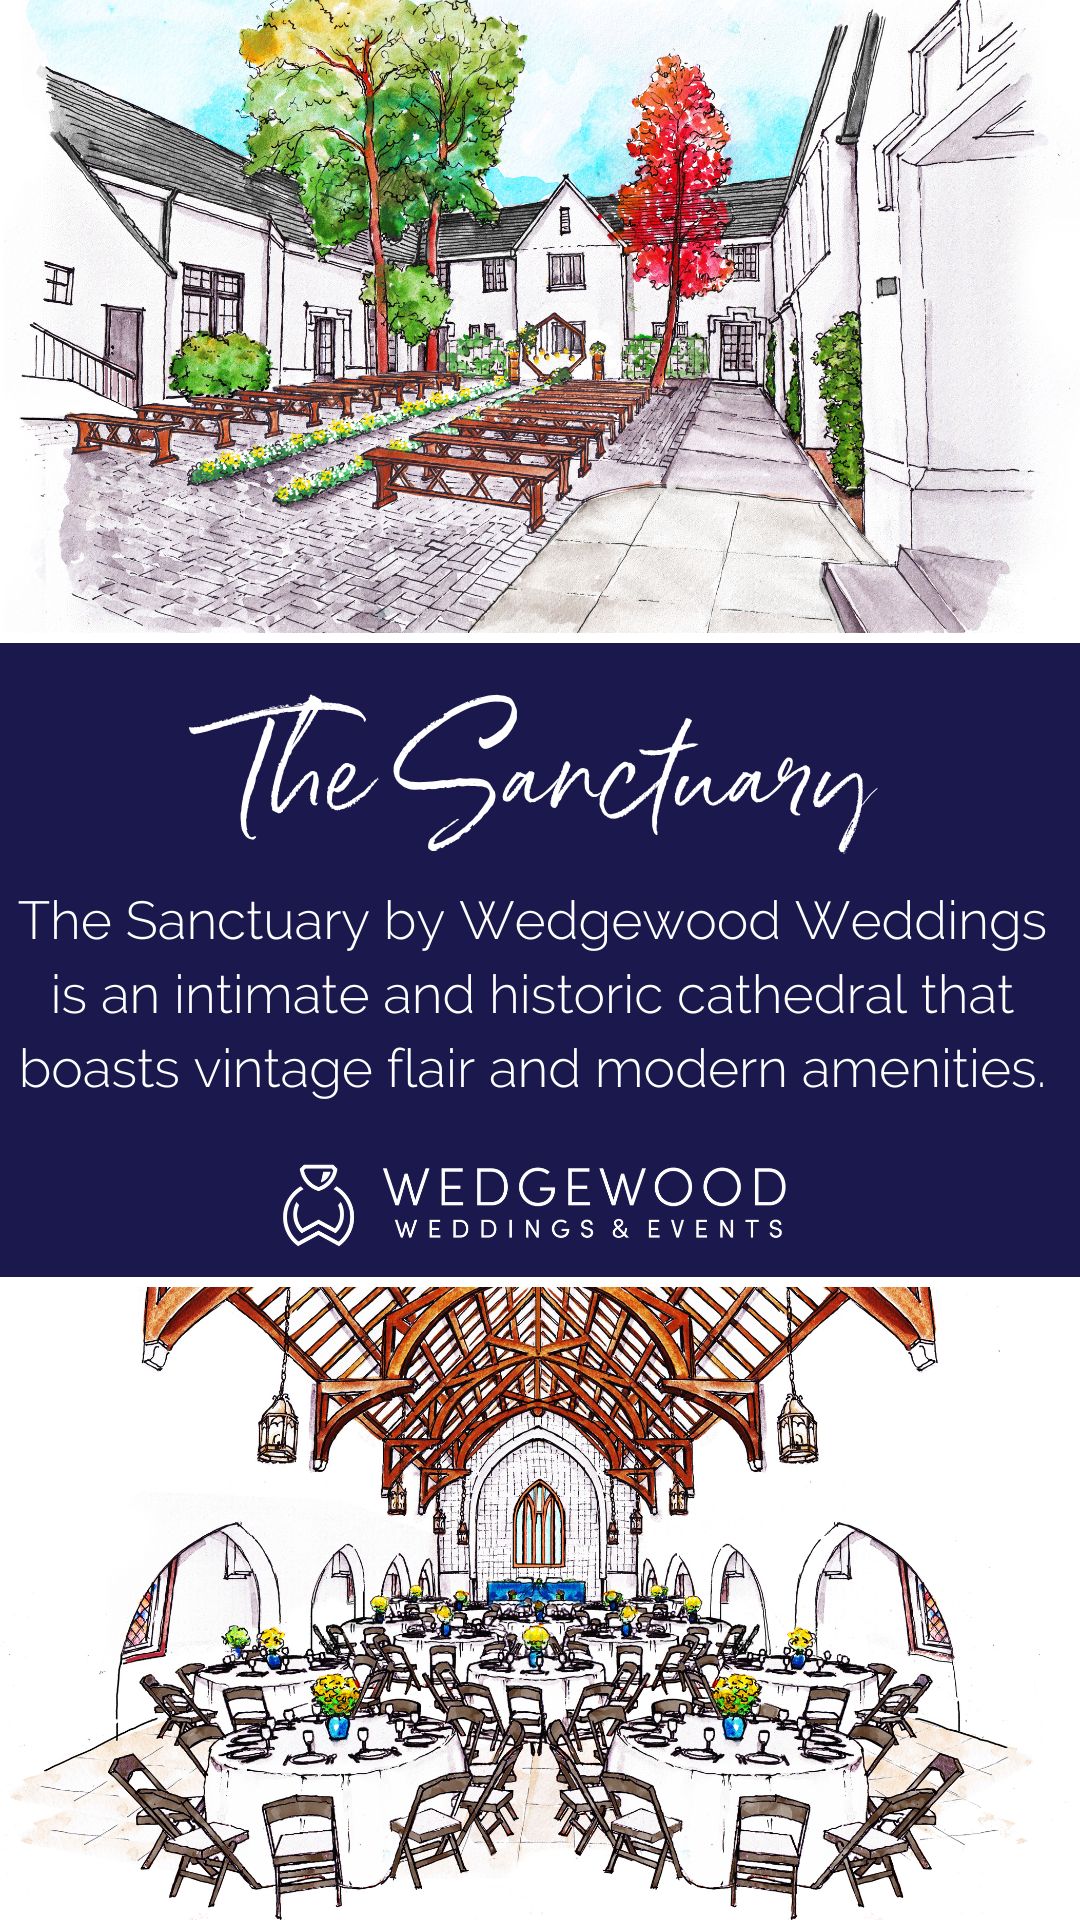 Long Beach is a favorite destination for activities, events, and also The Sanctuary by Wedgewood Weddings. Discover the hidden gem of Los Angeles County for yourself and see all that this historic property has to offer for events big and small. From the intimate courtyard to the expansive chapel and cozy grand hall, this stunning space is waiting to be explored!